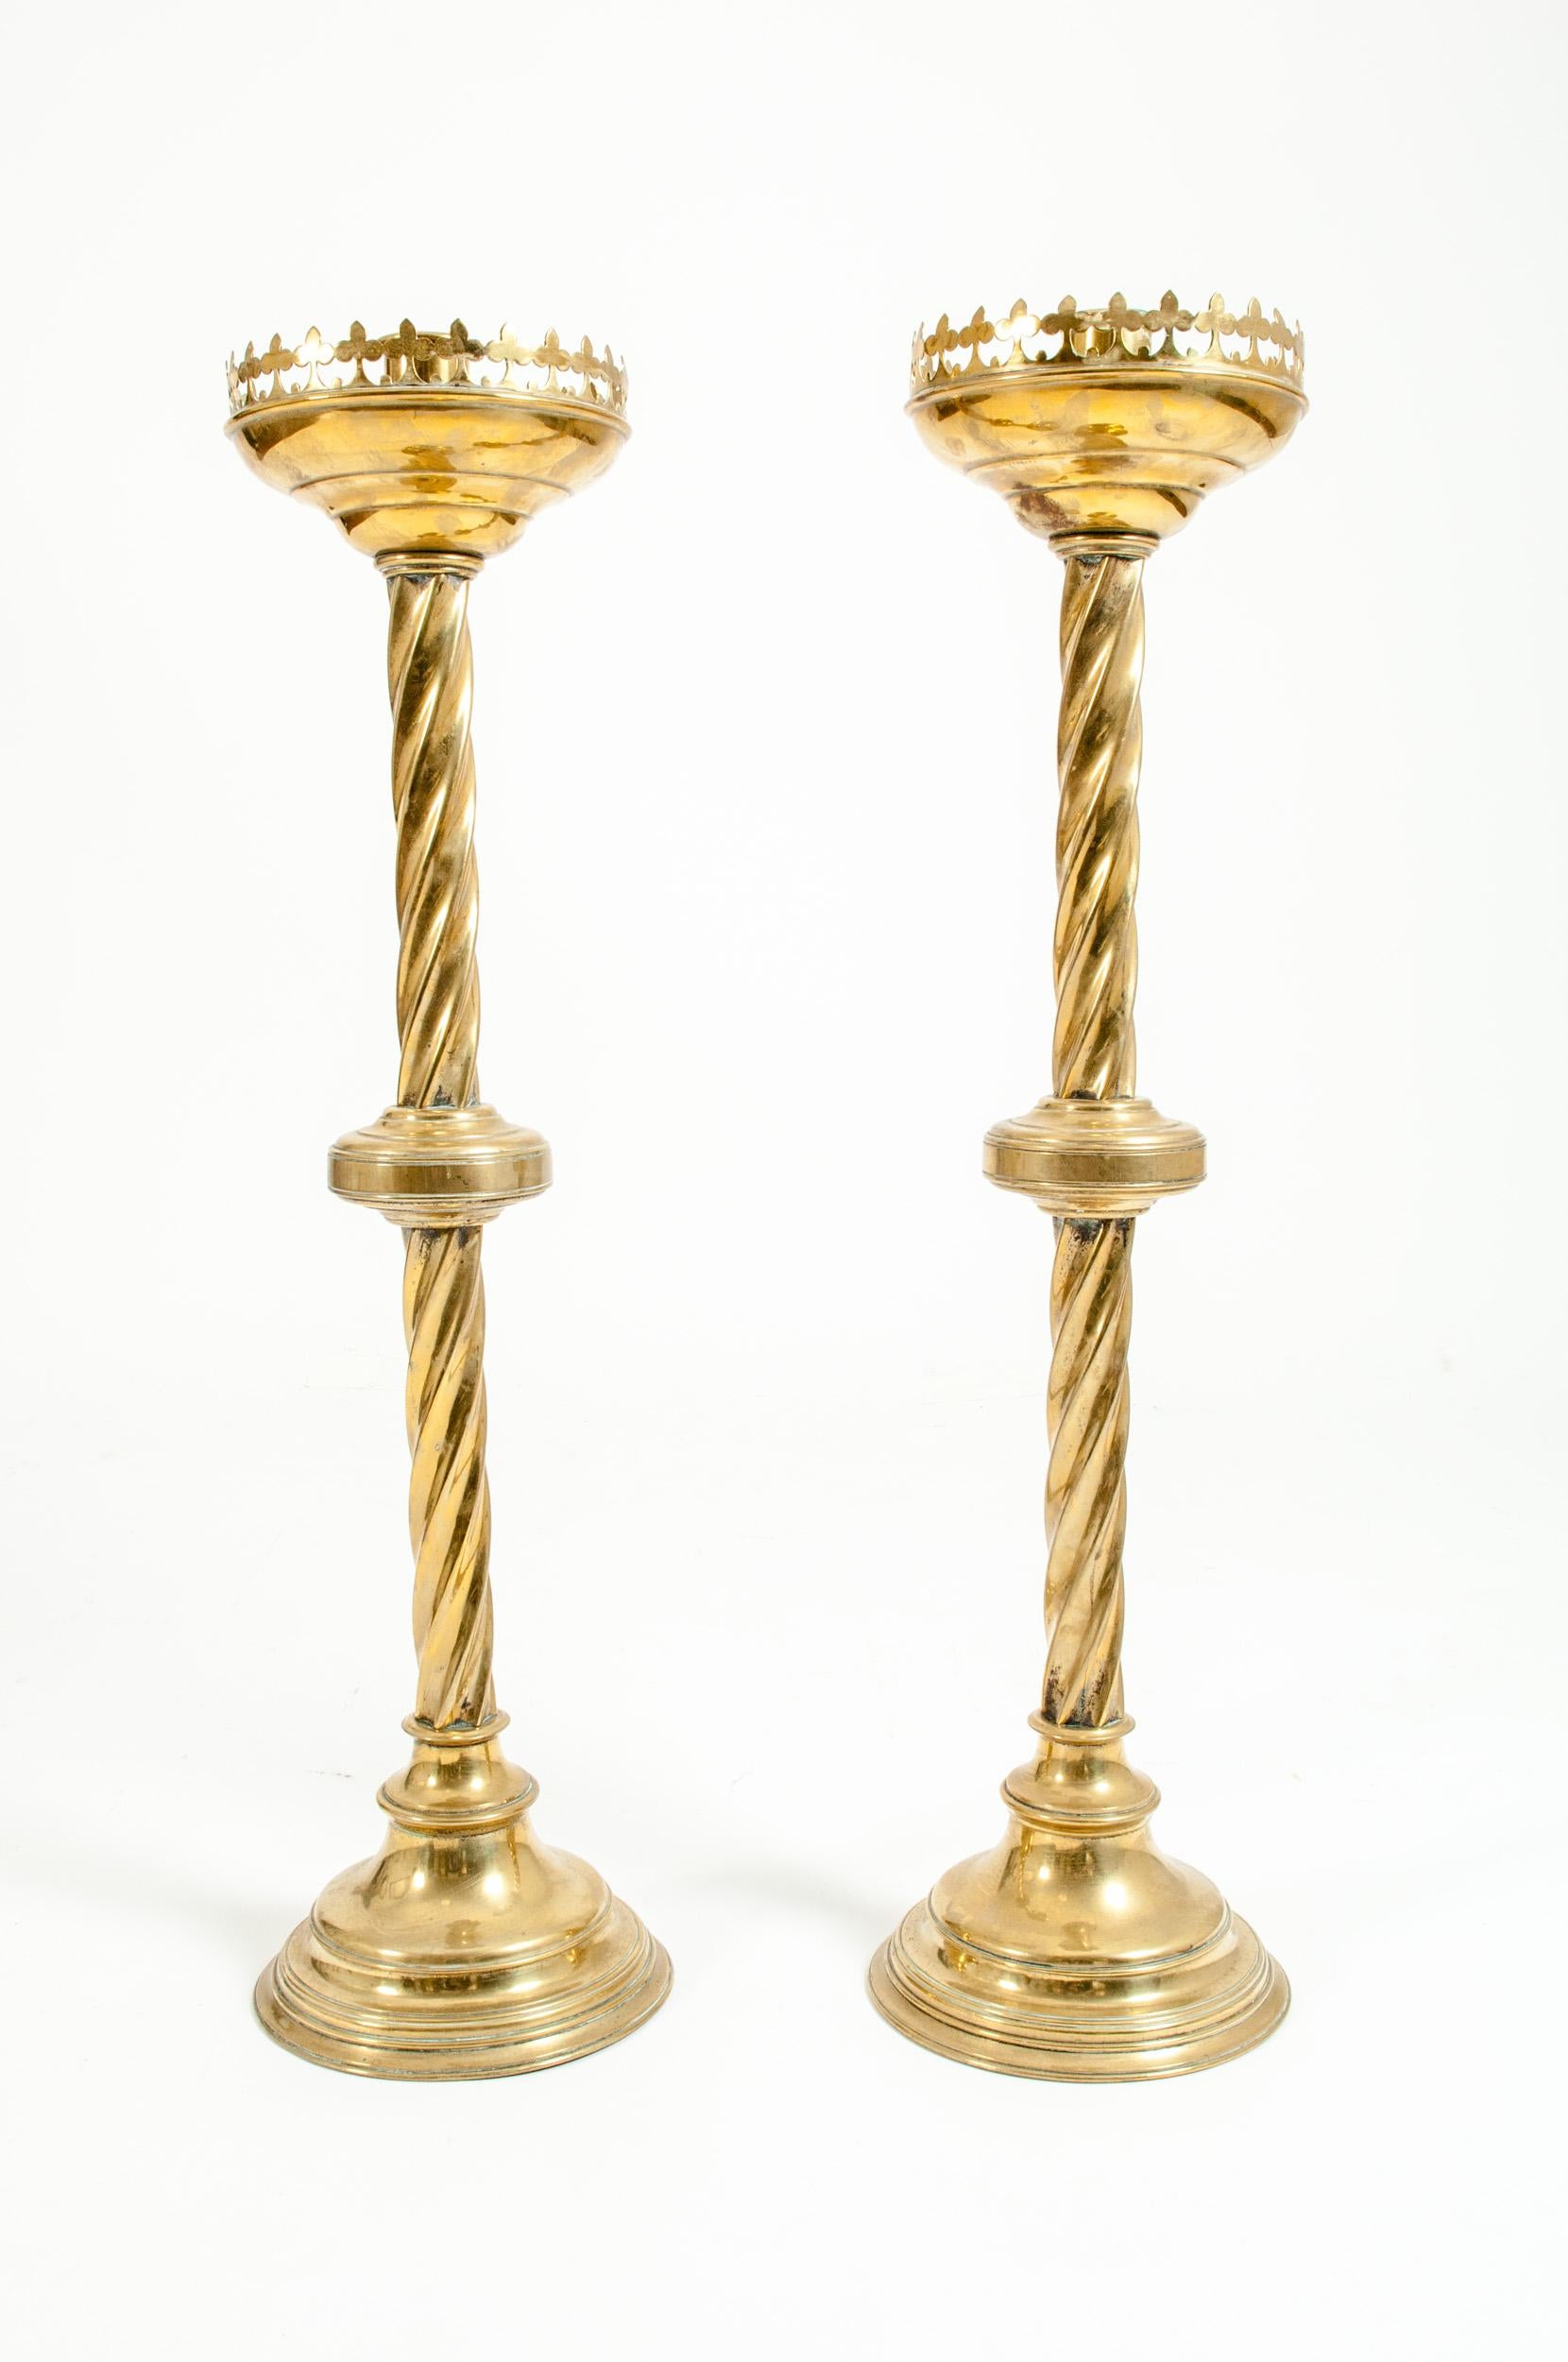 Tall and ornately decorative pair of late 19th century Gothic style brass candlesticks. The candlesticks consist of a candleholder to the top with a rimmed edge with a drip pan with a trefoil pierced gallery of typical Gothic design. And leads down